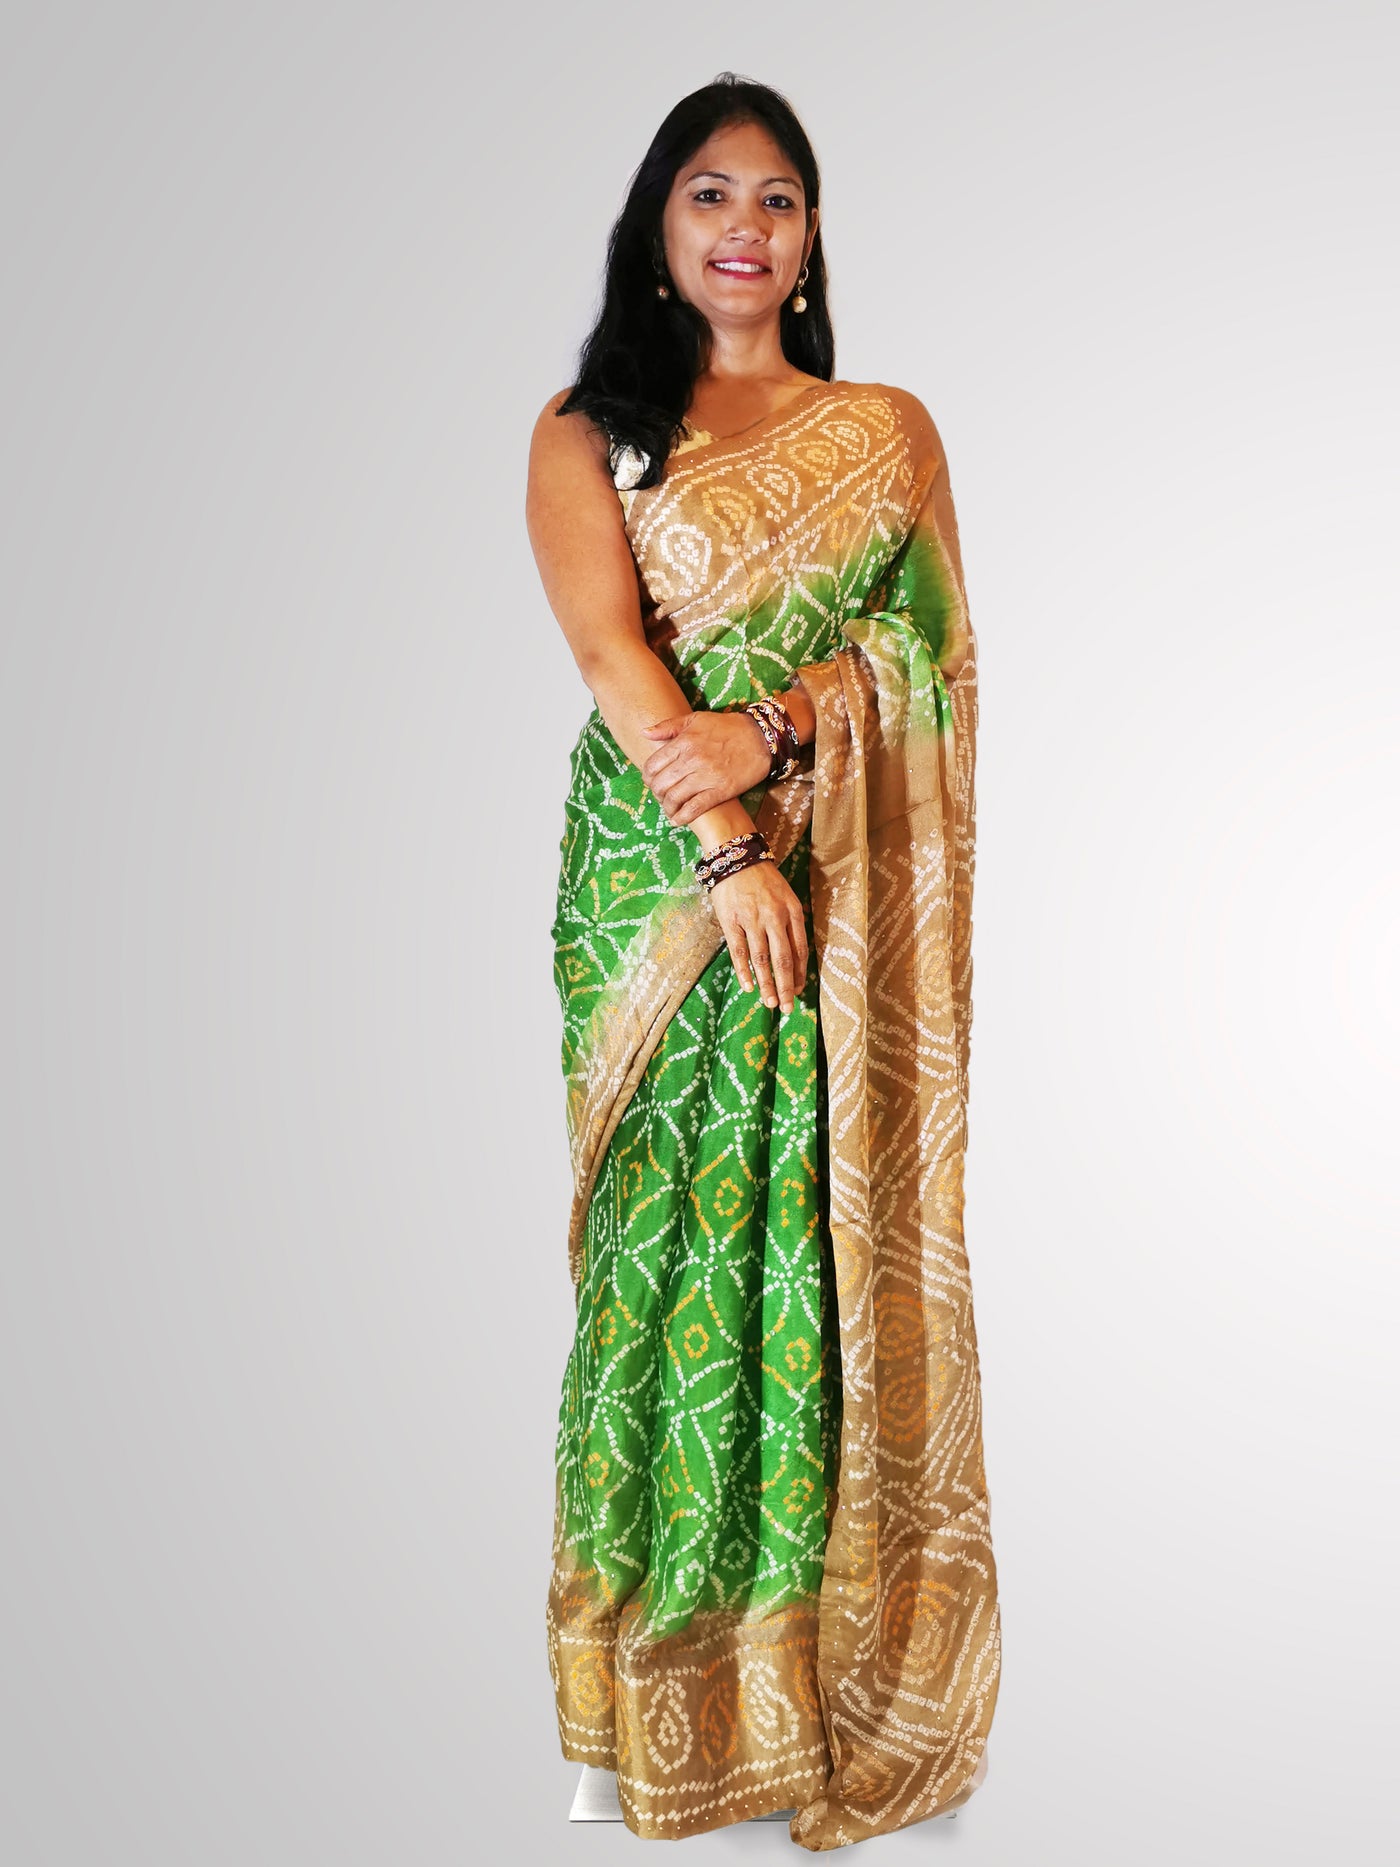 Saree in Green and Tan Bandini Silk with Self Printed Design - Indian Clothing in Denver, CO, Aurora, CO, Boulder, CO, Fort Collins, CO, Colorado Springs, CO, Parker, CO, Highlands Ranch, CO, Cherry Creek, CO, Centennial, CO, and Longmont, CO. Nationwide shipping USA - India Fashion X